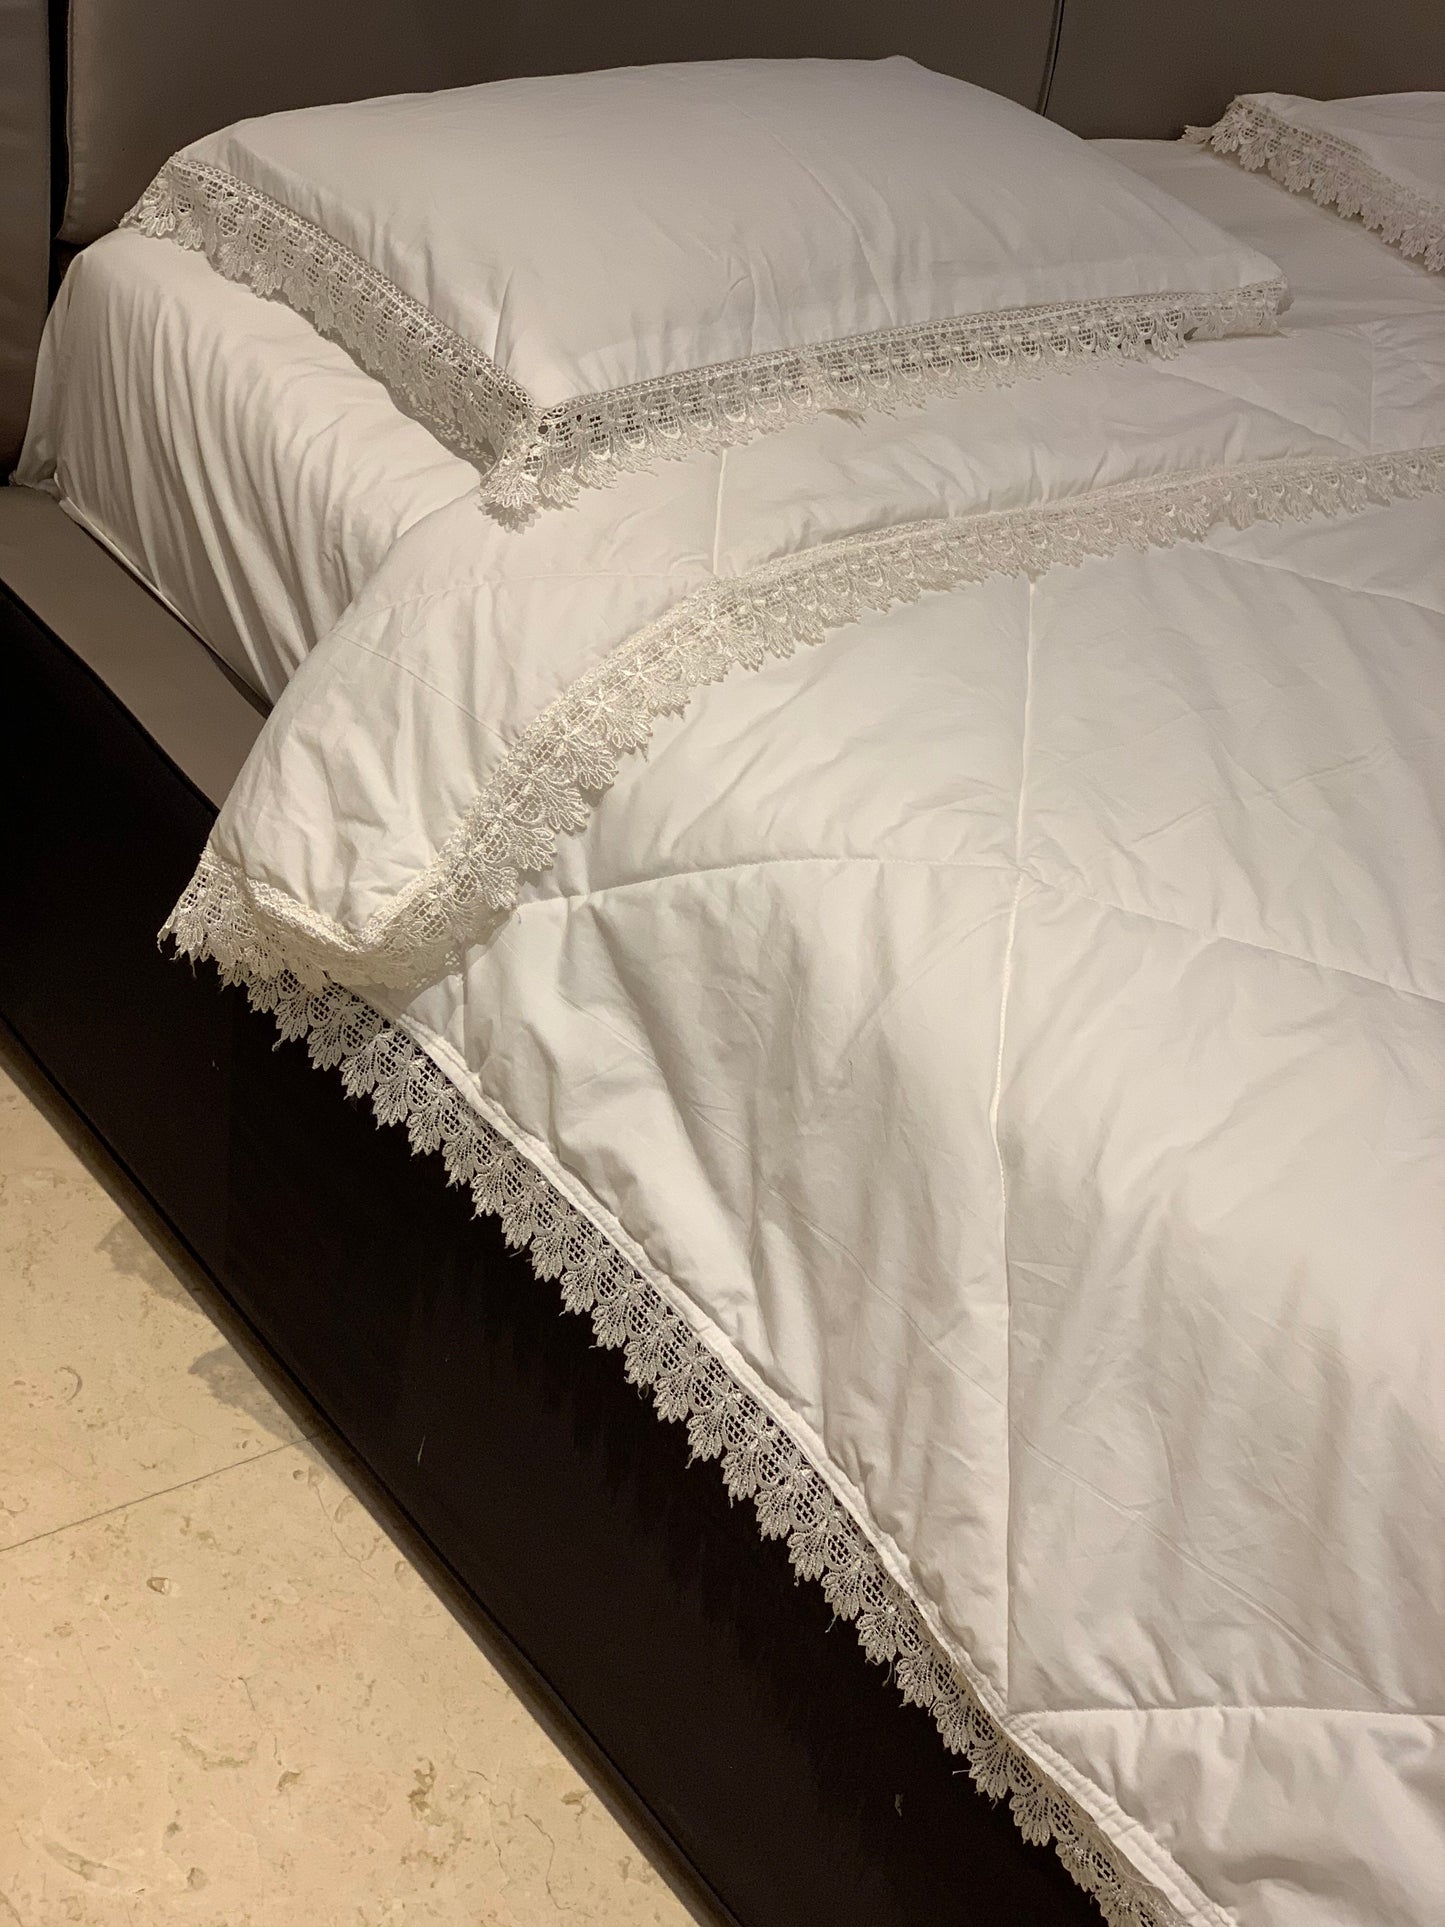 Lace comforter